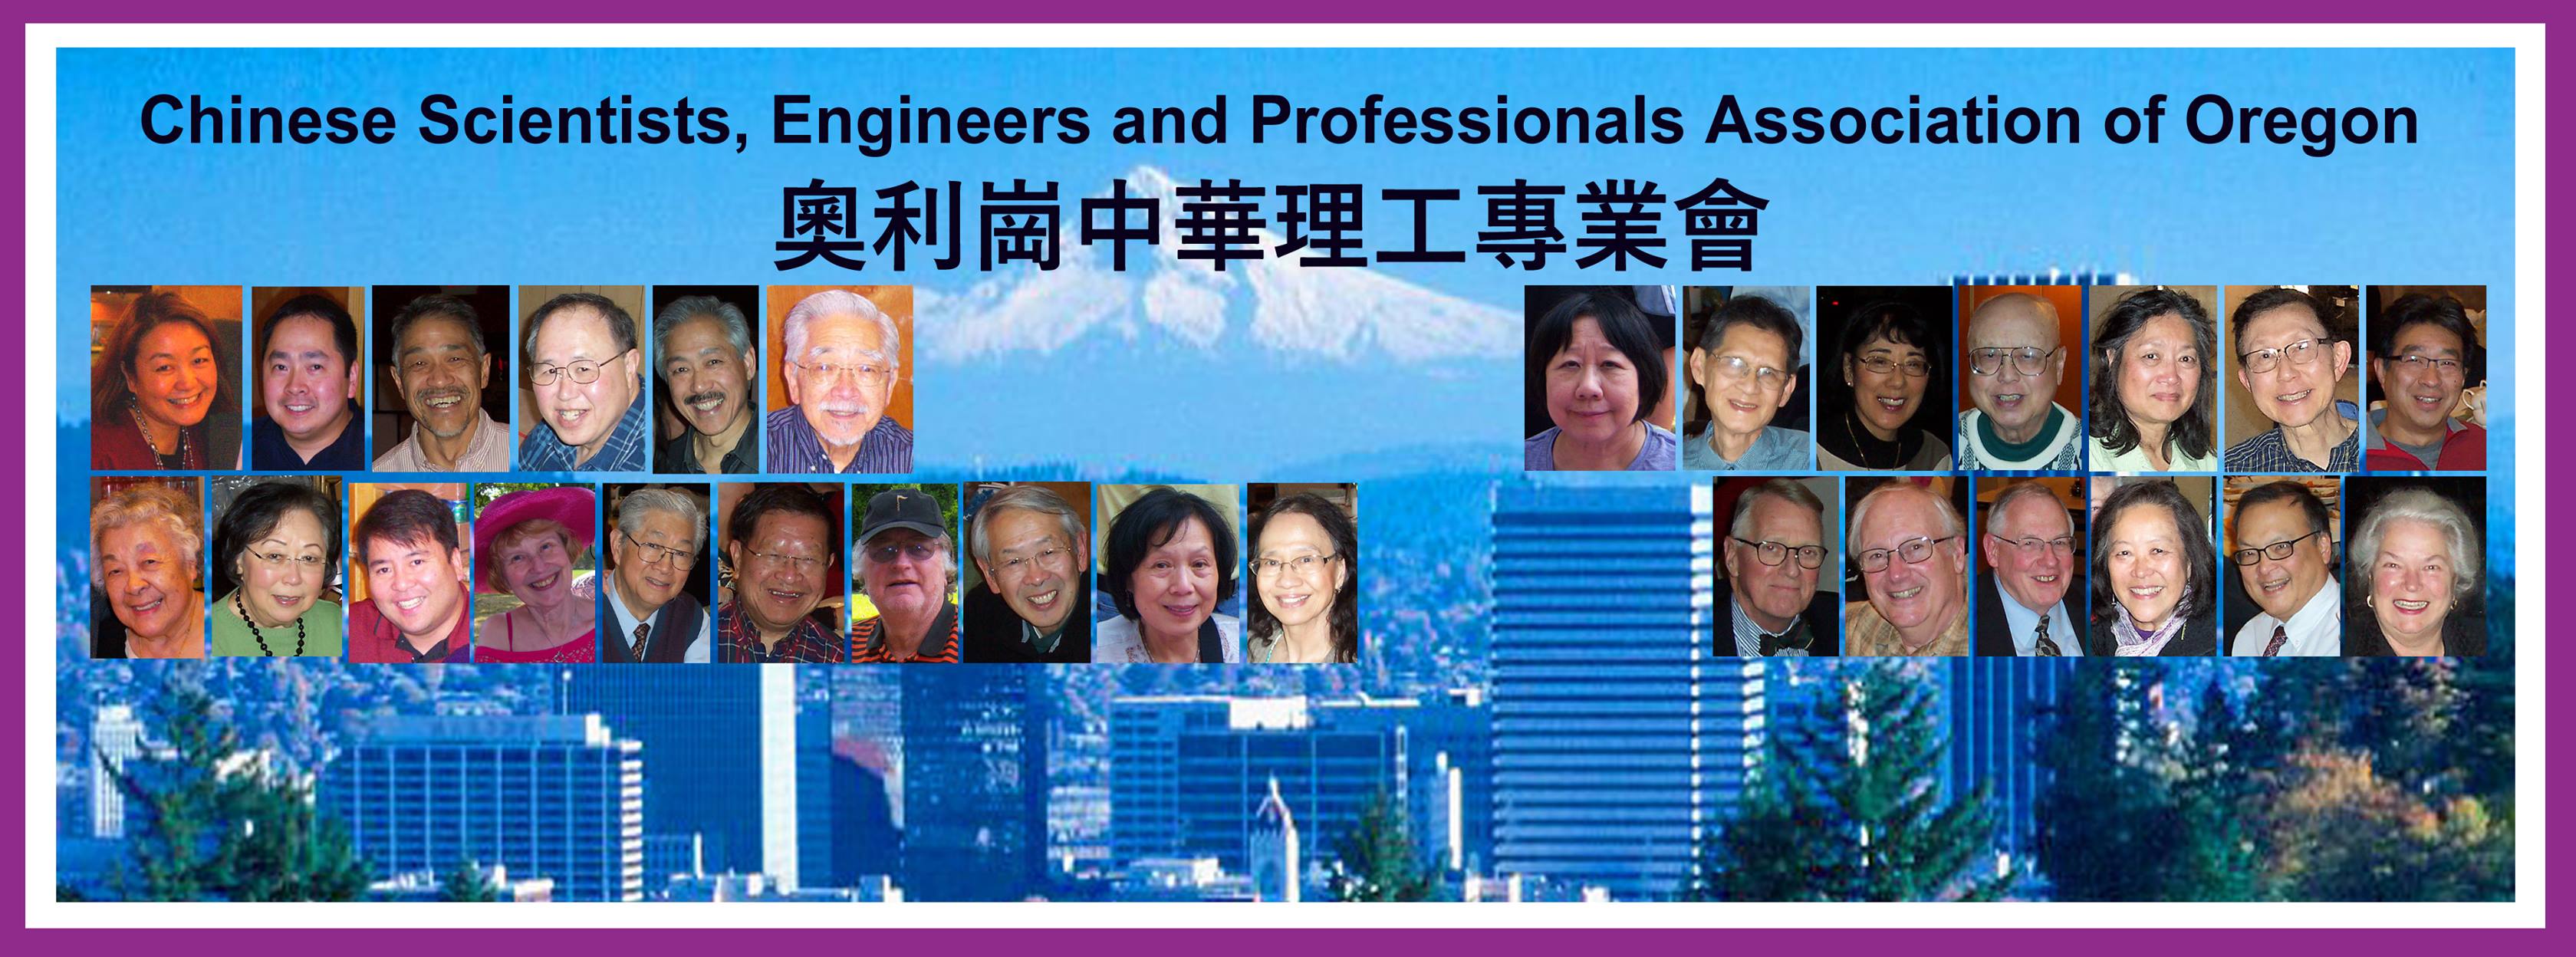 Chinese Scientists Engineers and Professionals Association